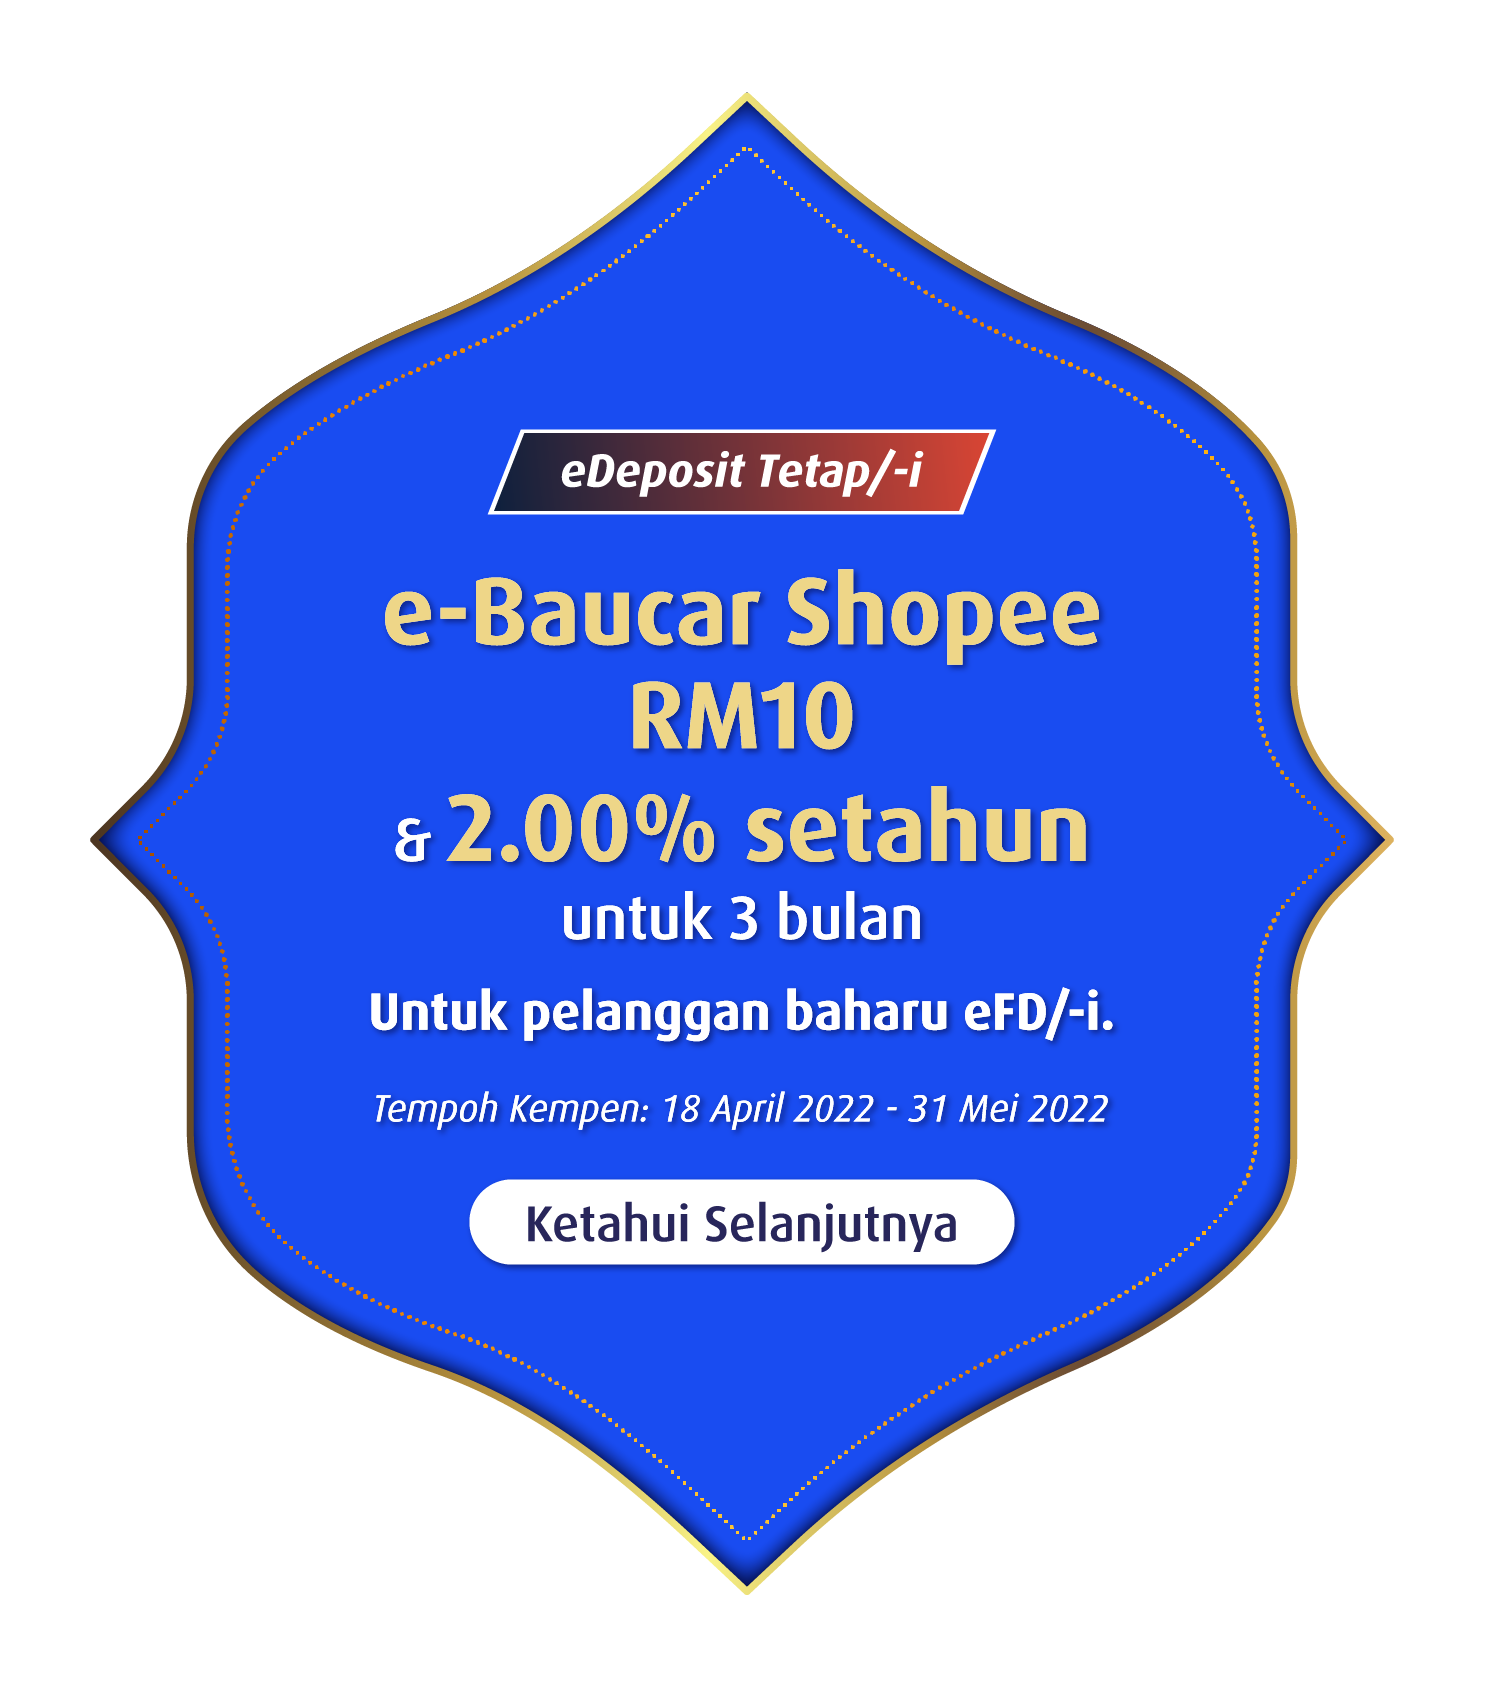 eFixed Deposit/-i 2.00% p.a. for 3 months & RM10 Shopee e-Voucher For new eFD/-i customers